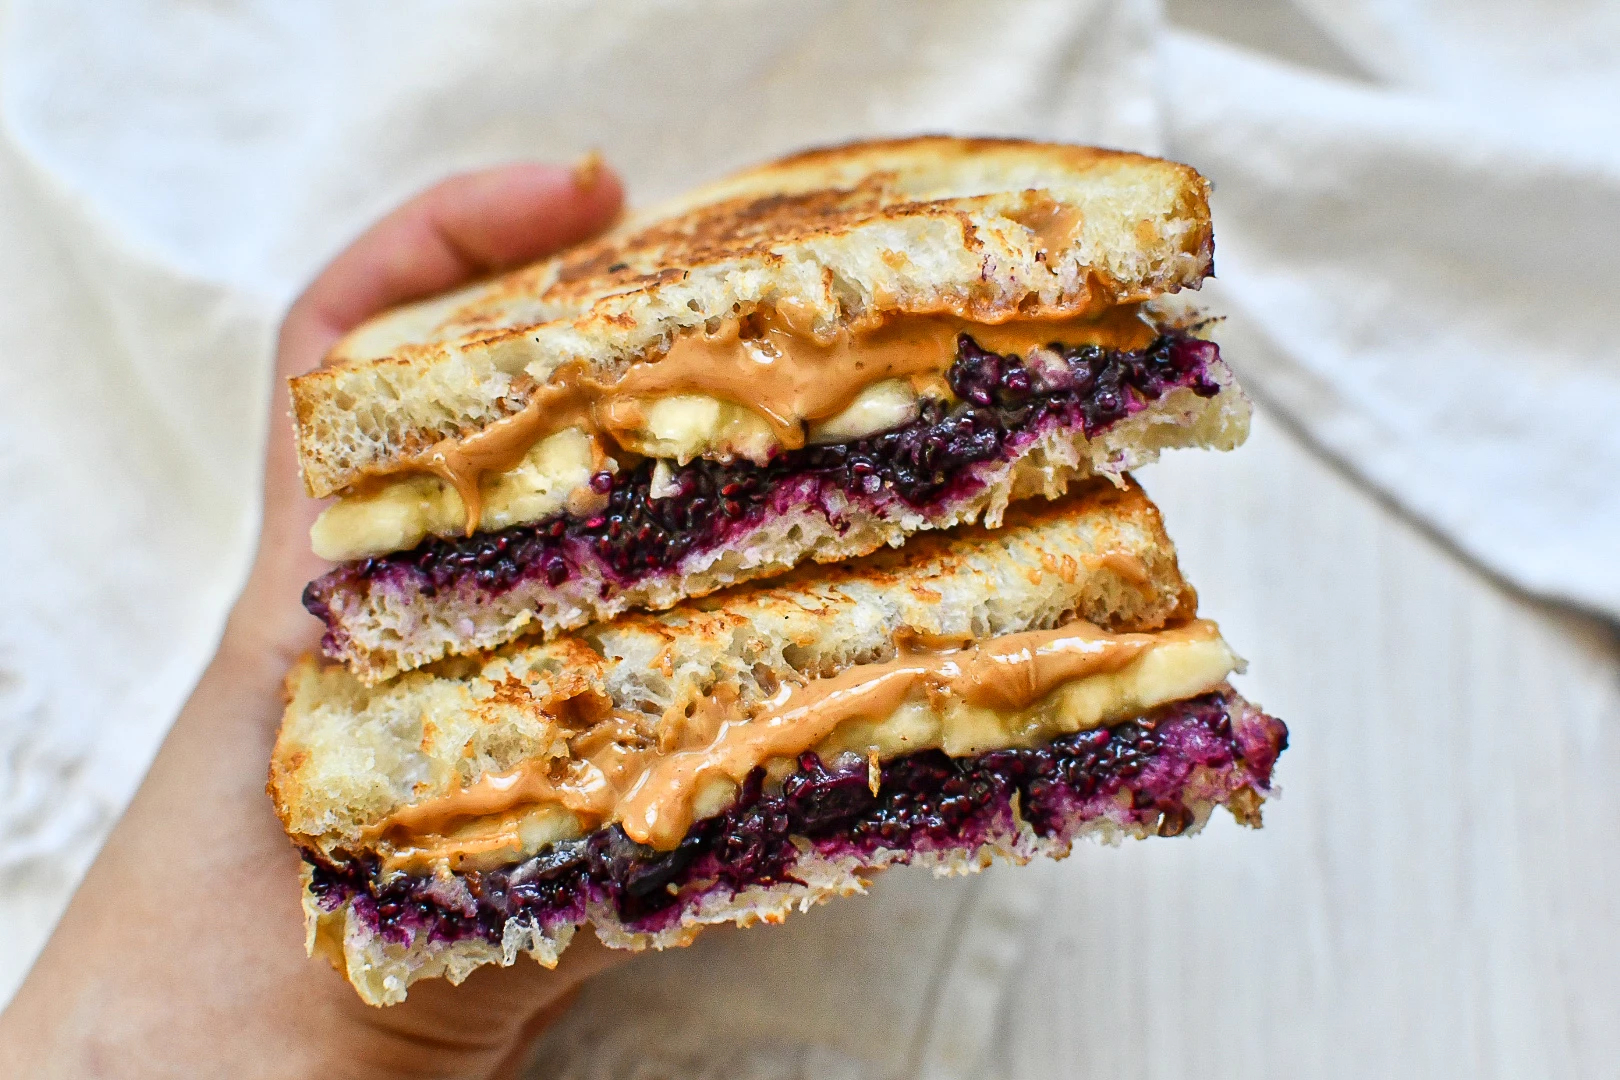 Decadent Grilled And Stuffed PB&J - Simply Unbeetable